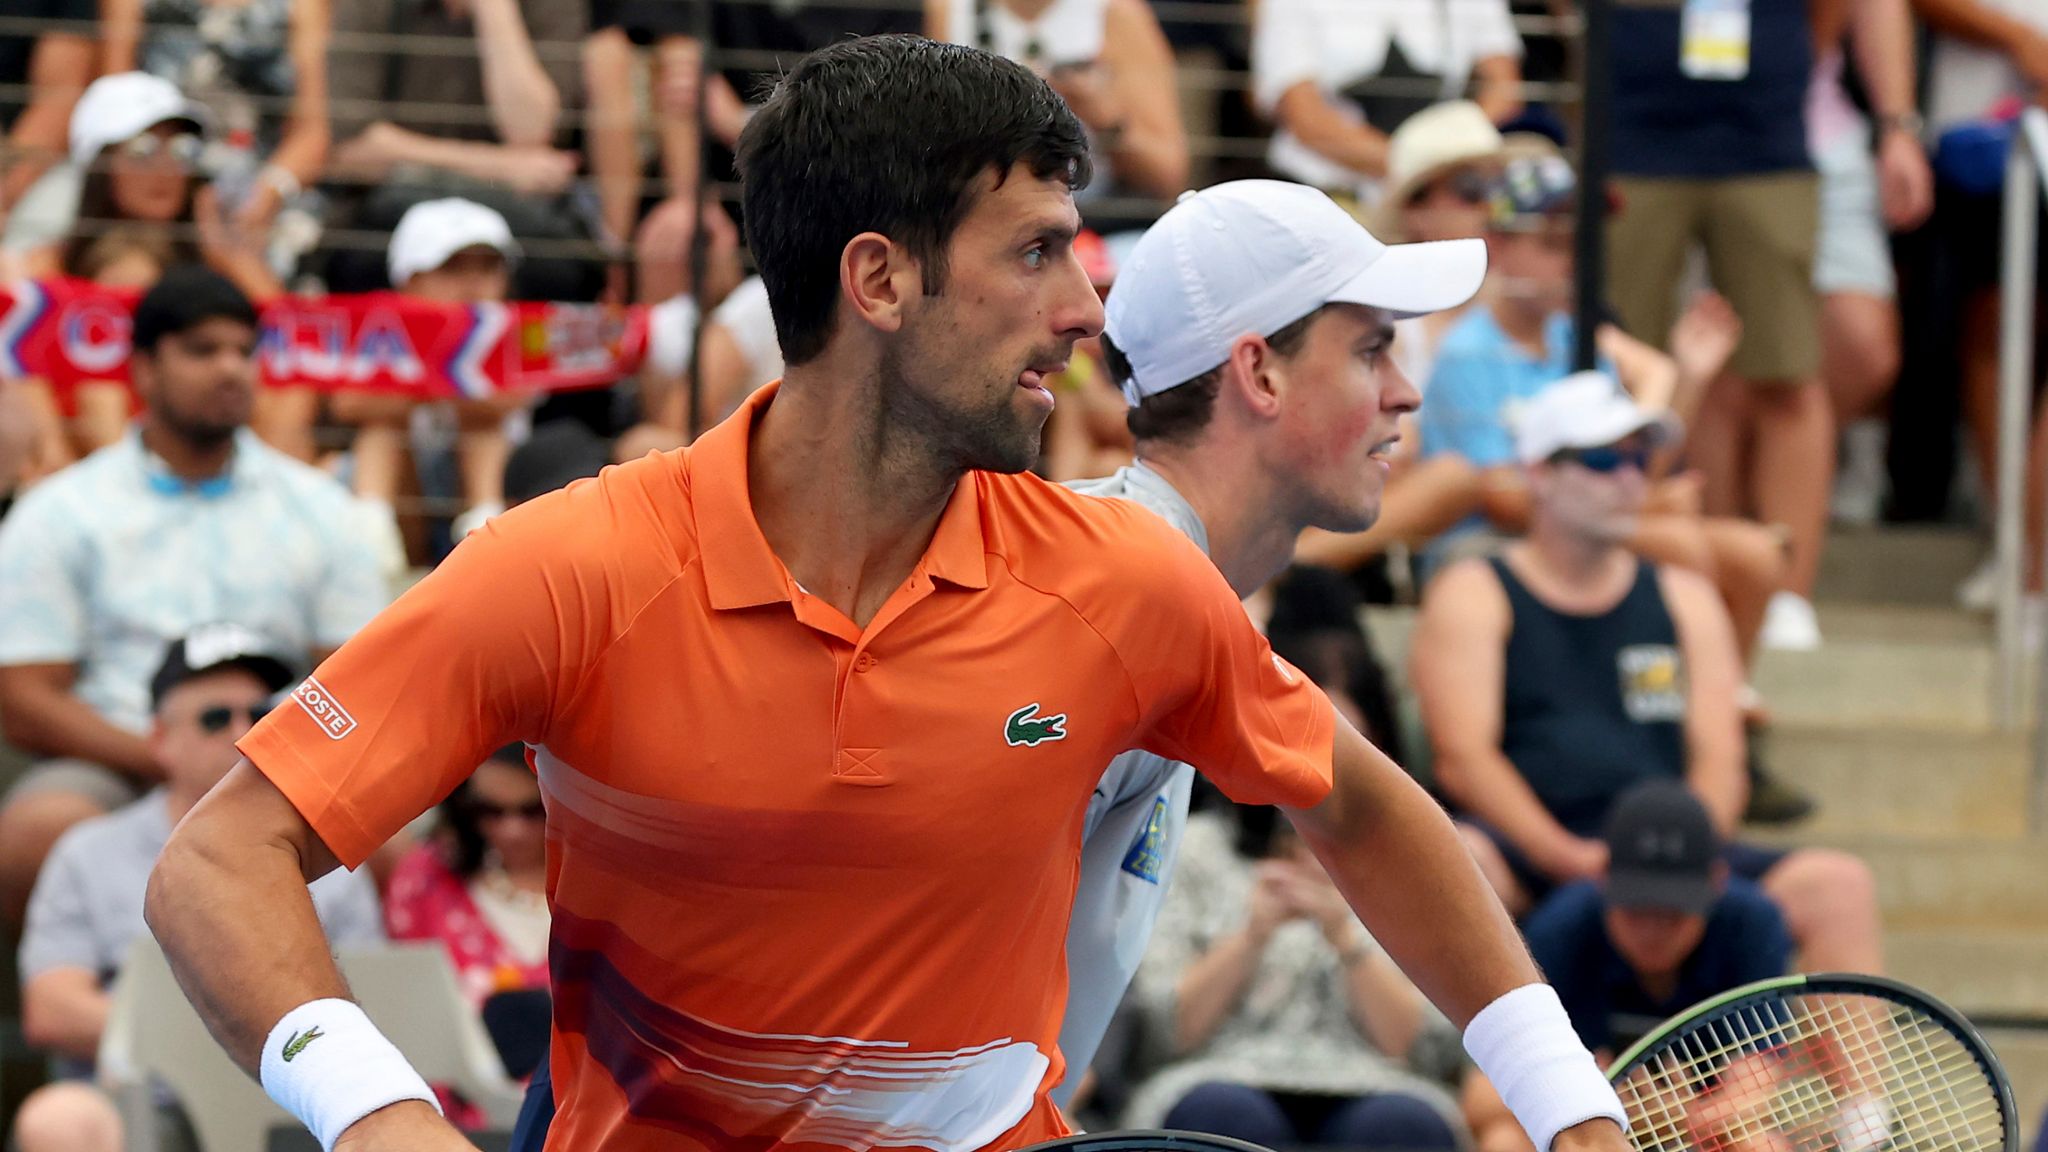 Novak Djokovic loses in first match on return to Australia after decision to overturn his visa ban Tennis News Sky Sports